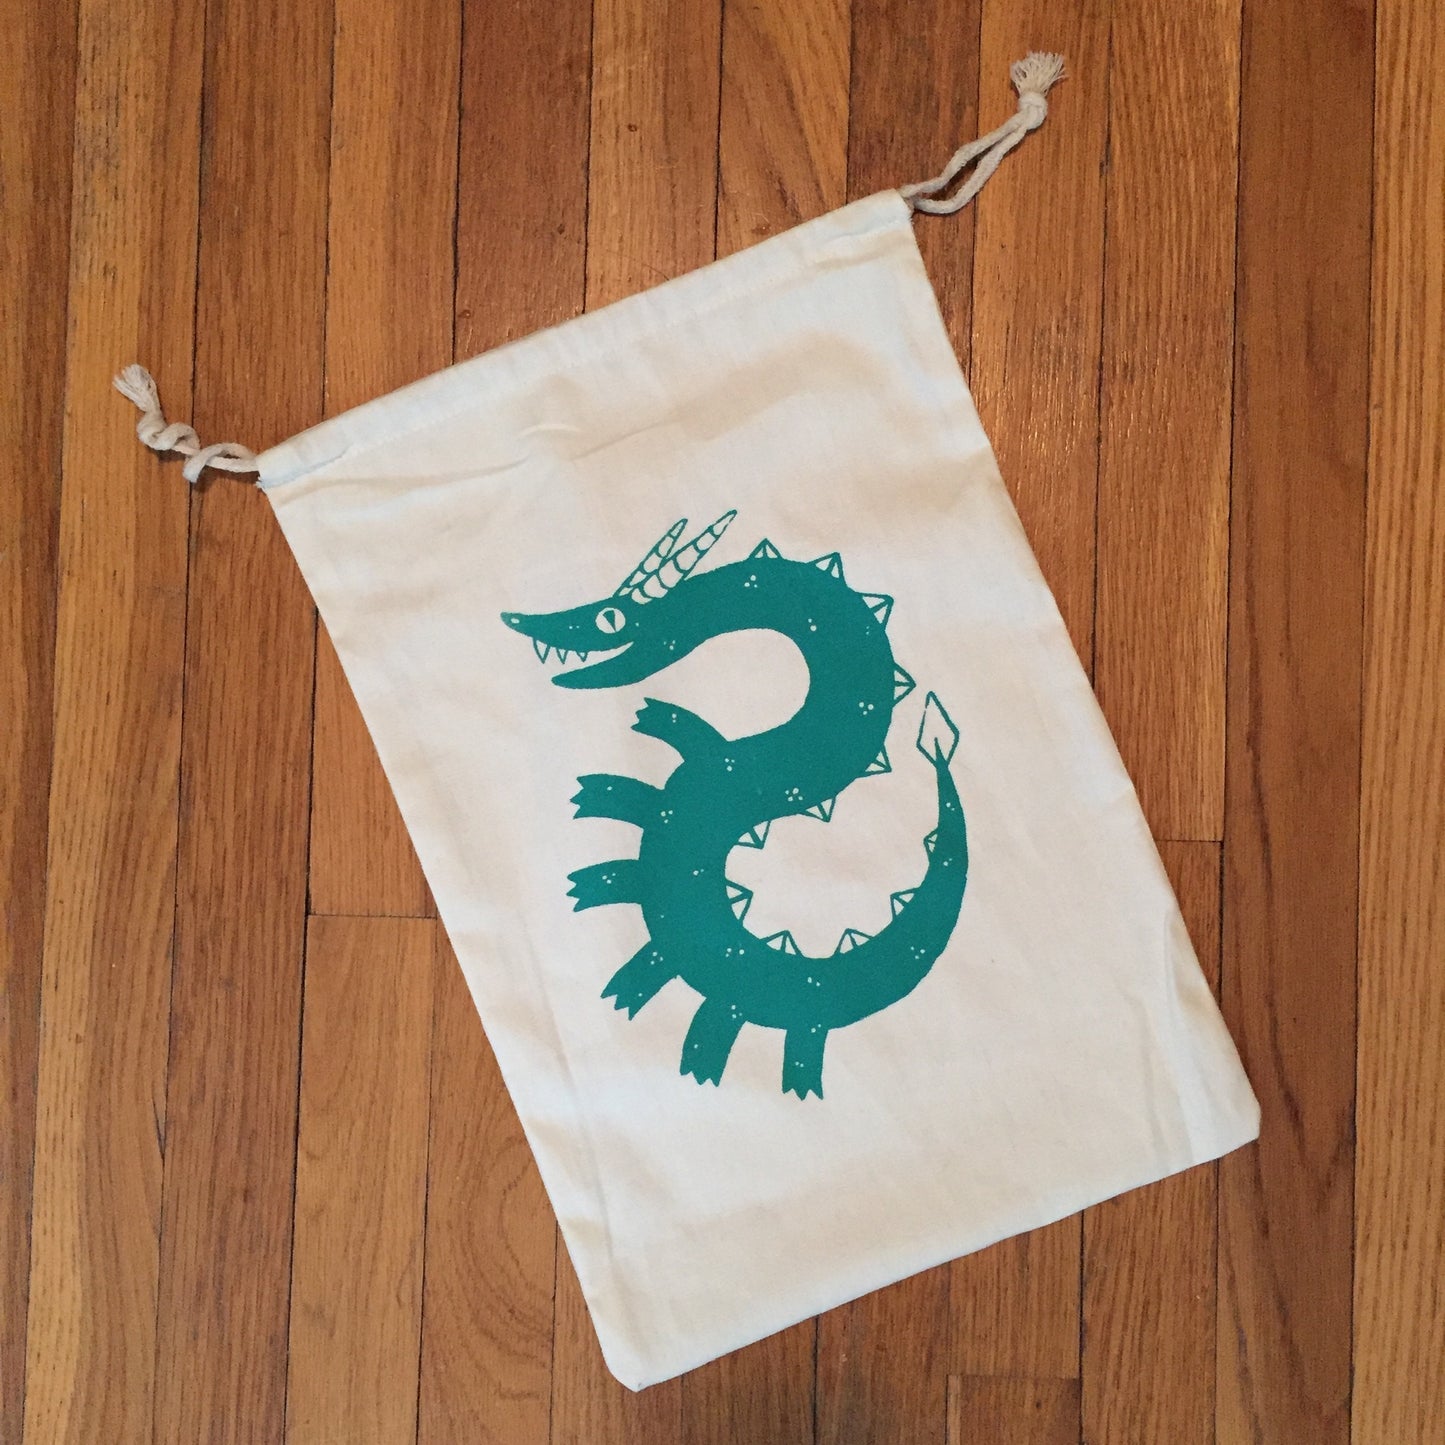 THE GROCERY DRAGON, Large Cotton Produce Bag